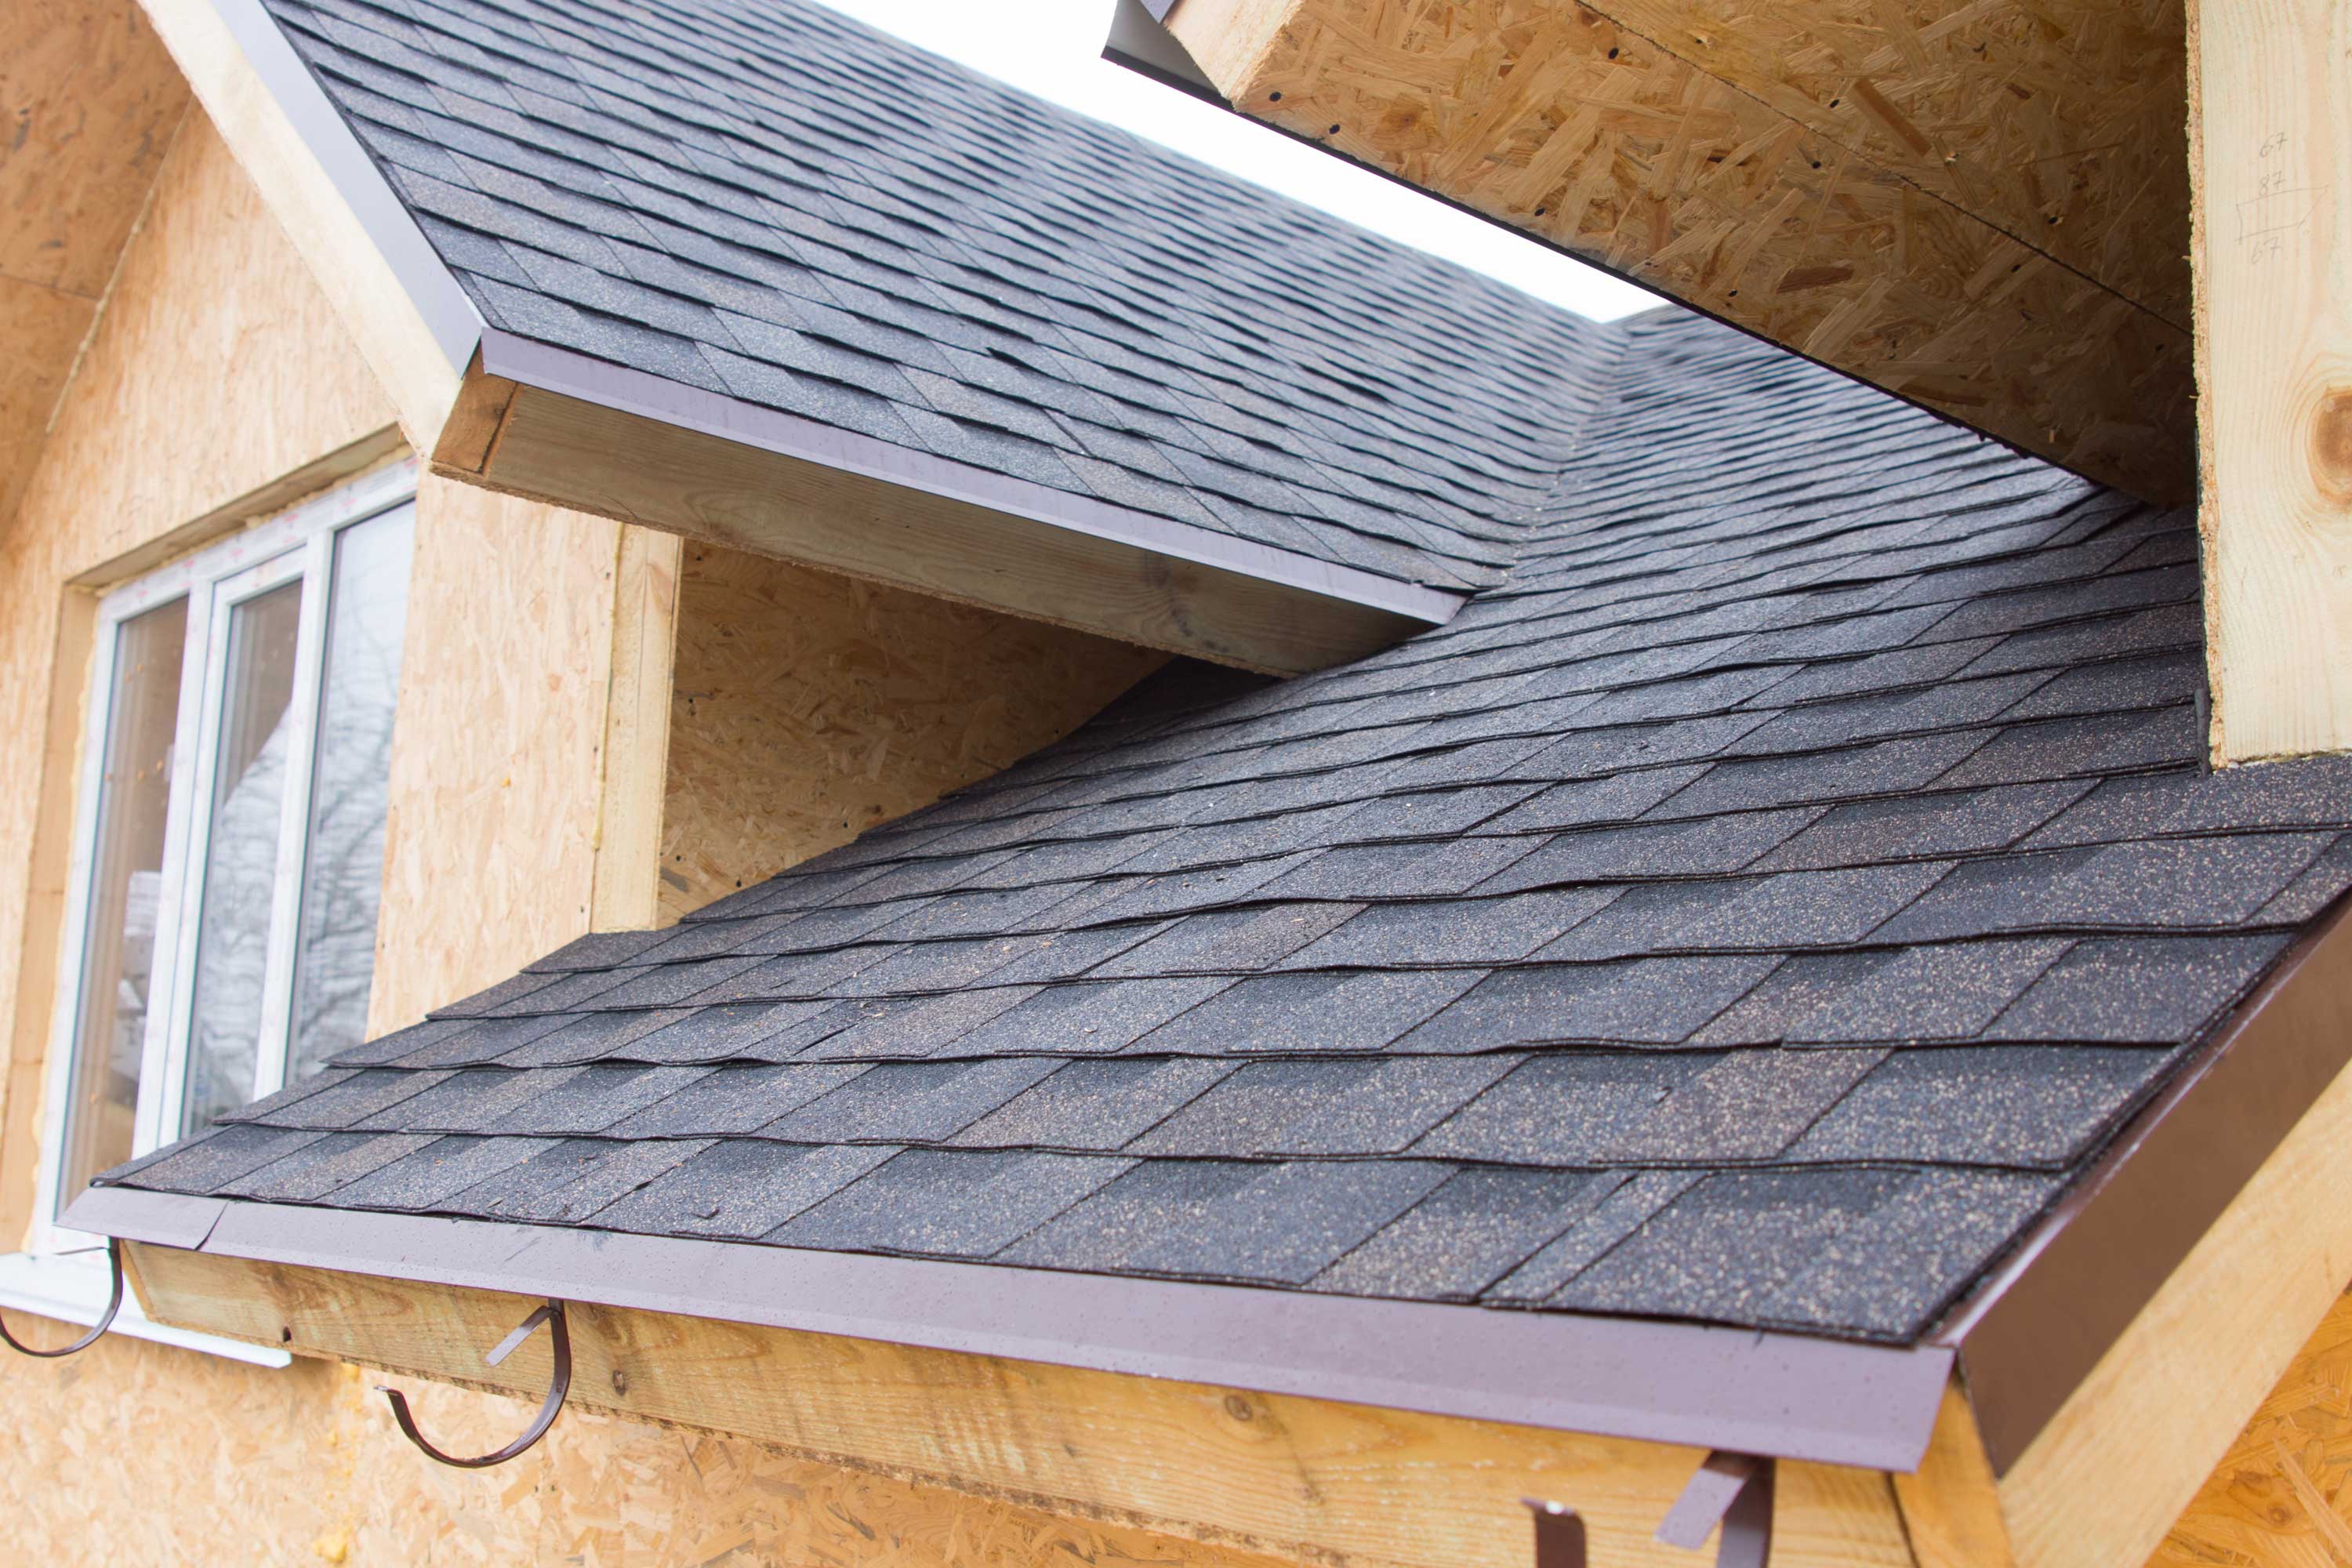 Trusted Local Roofing Contractor in Raeford, NC